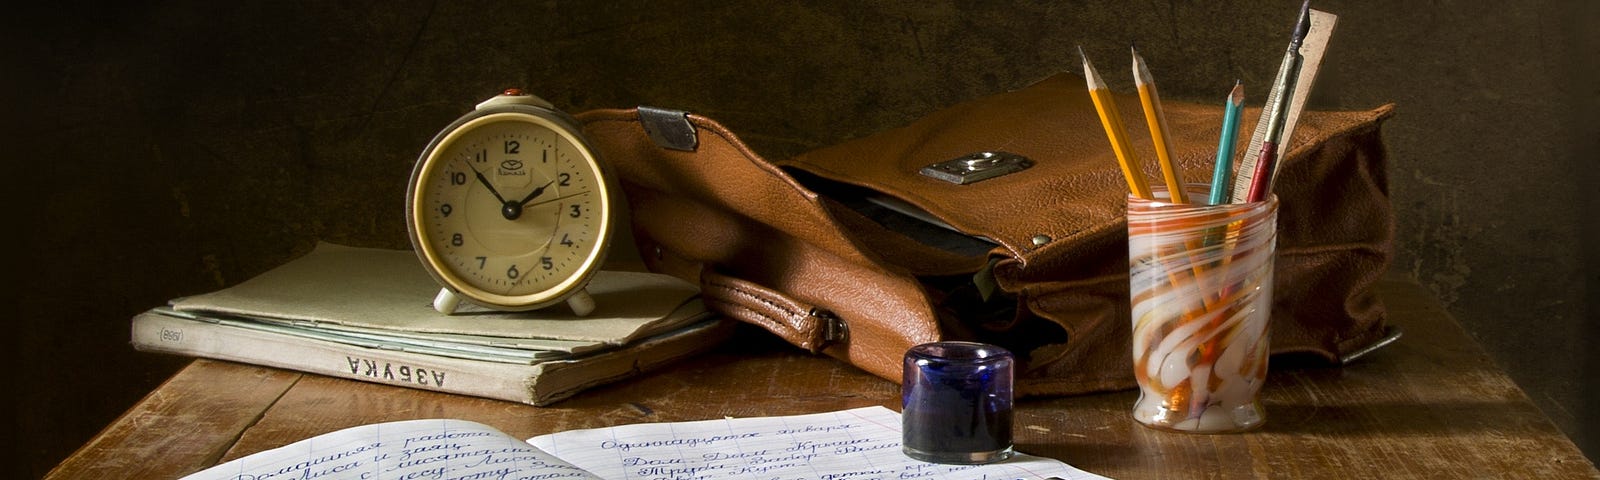 A notebook, bag, and pencil on a wooden desk.